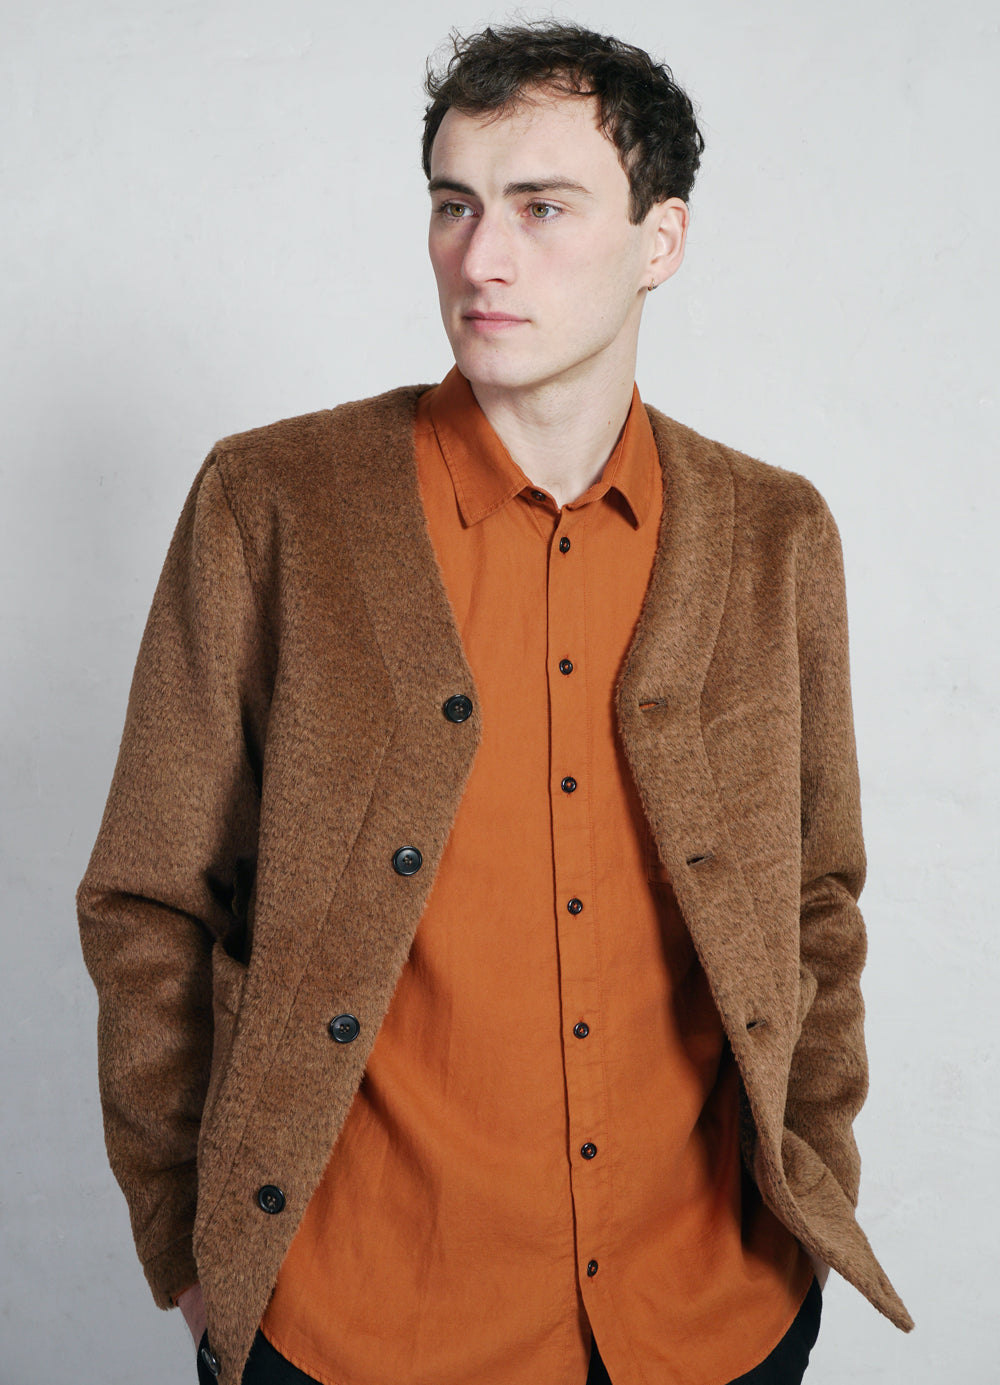 HENNING | Casual Classic Shirt | Tanned